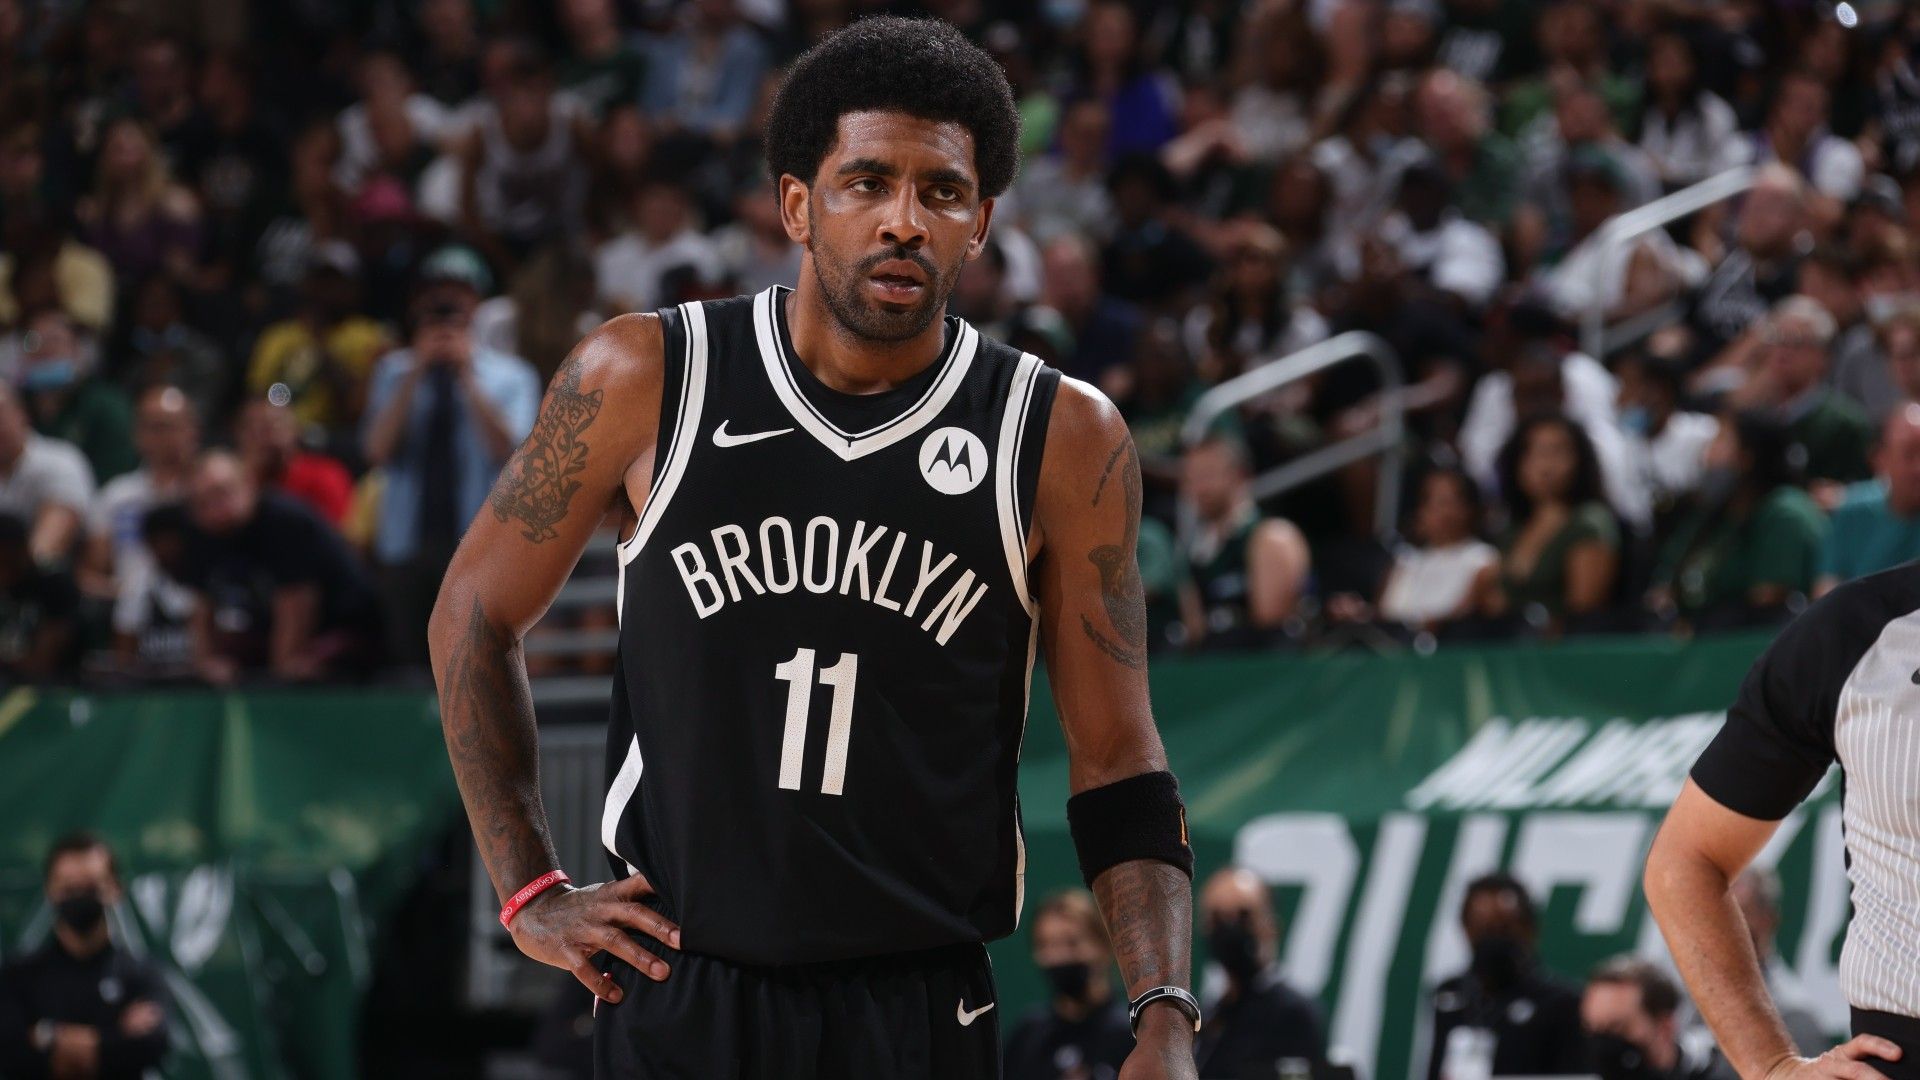 Kyrie Irving asks for privacy about vaccine, availability for Brooklyn Nets